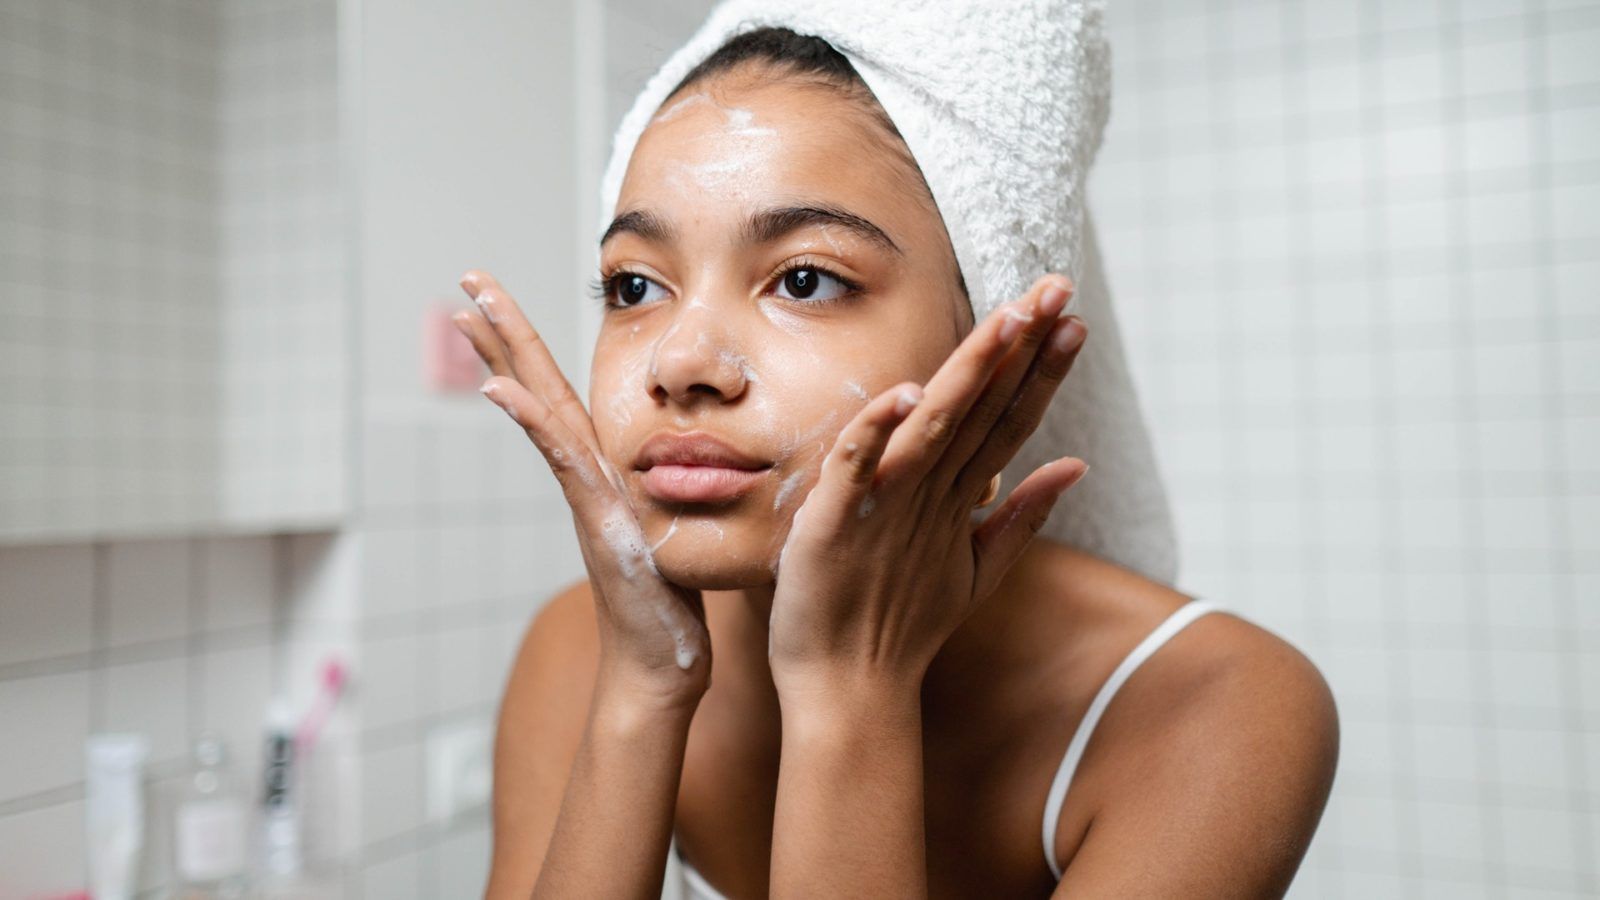 Swap out your face wash for these gentle milk cleansers instead